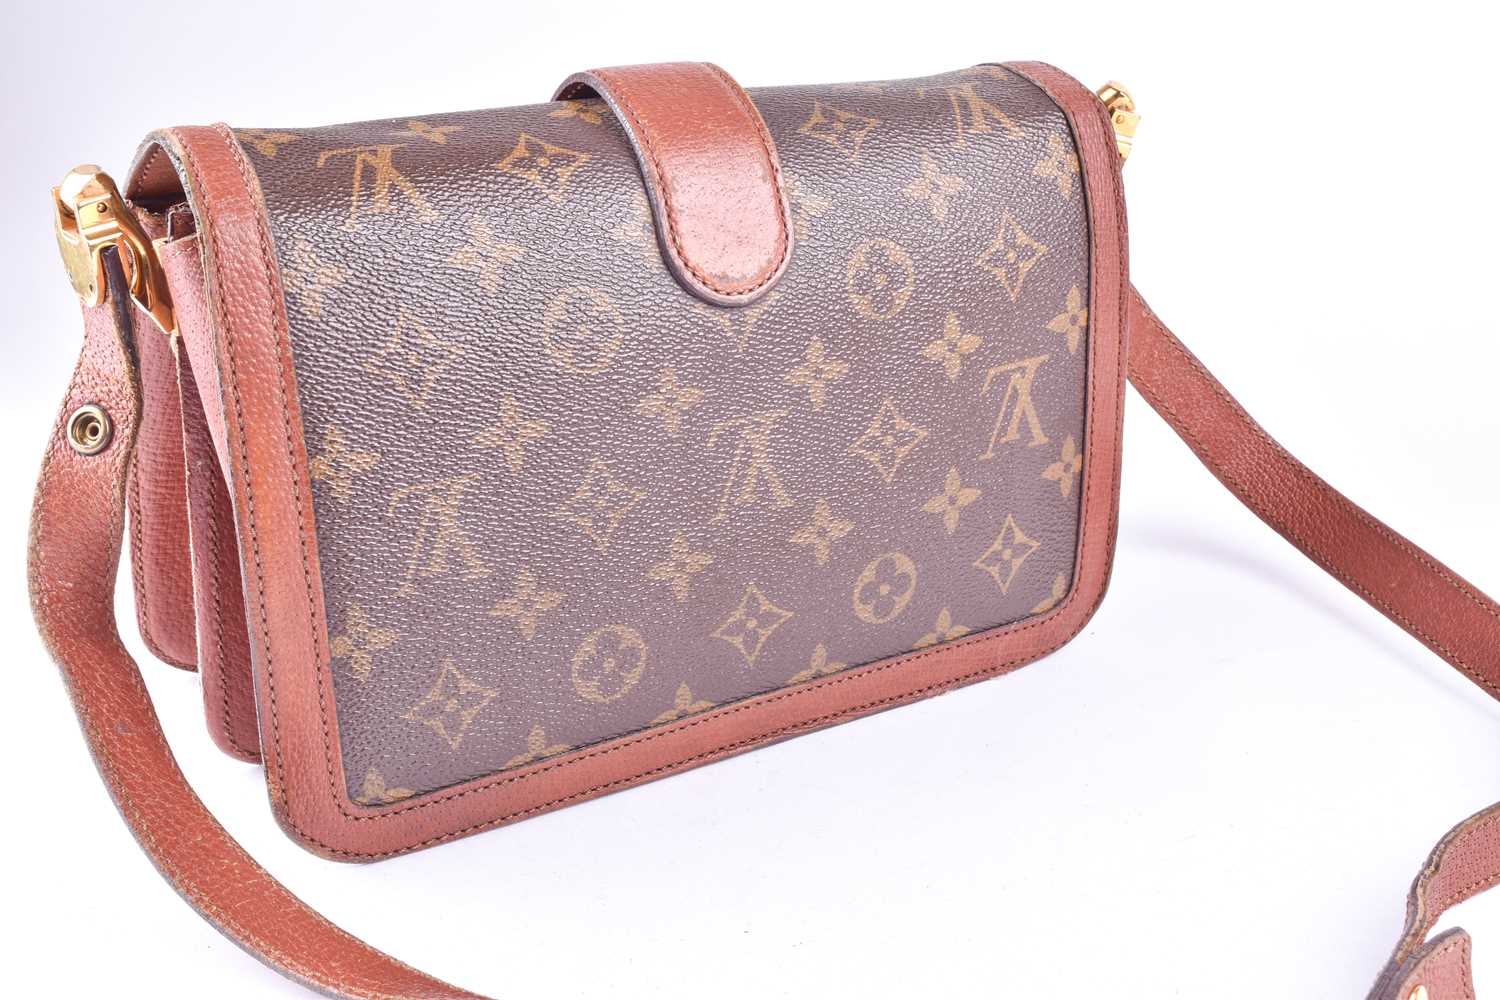 Louis Vuitton. A vintage 1980s monogram leather satchel handbag, with brown leather and monogram - Image 10 of 11